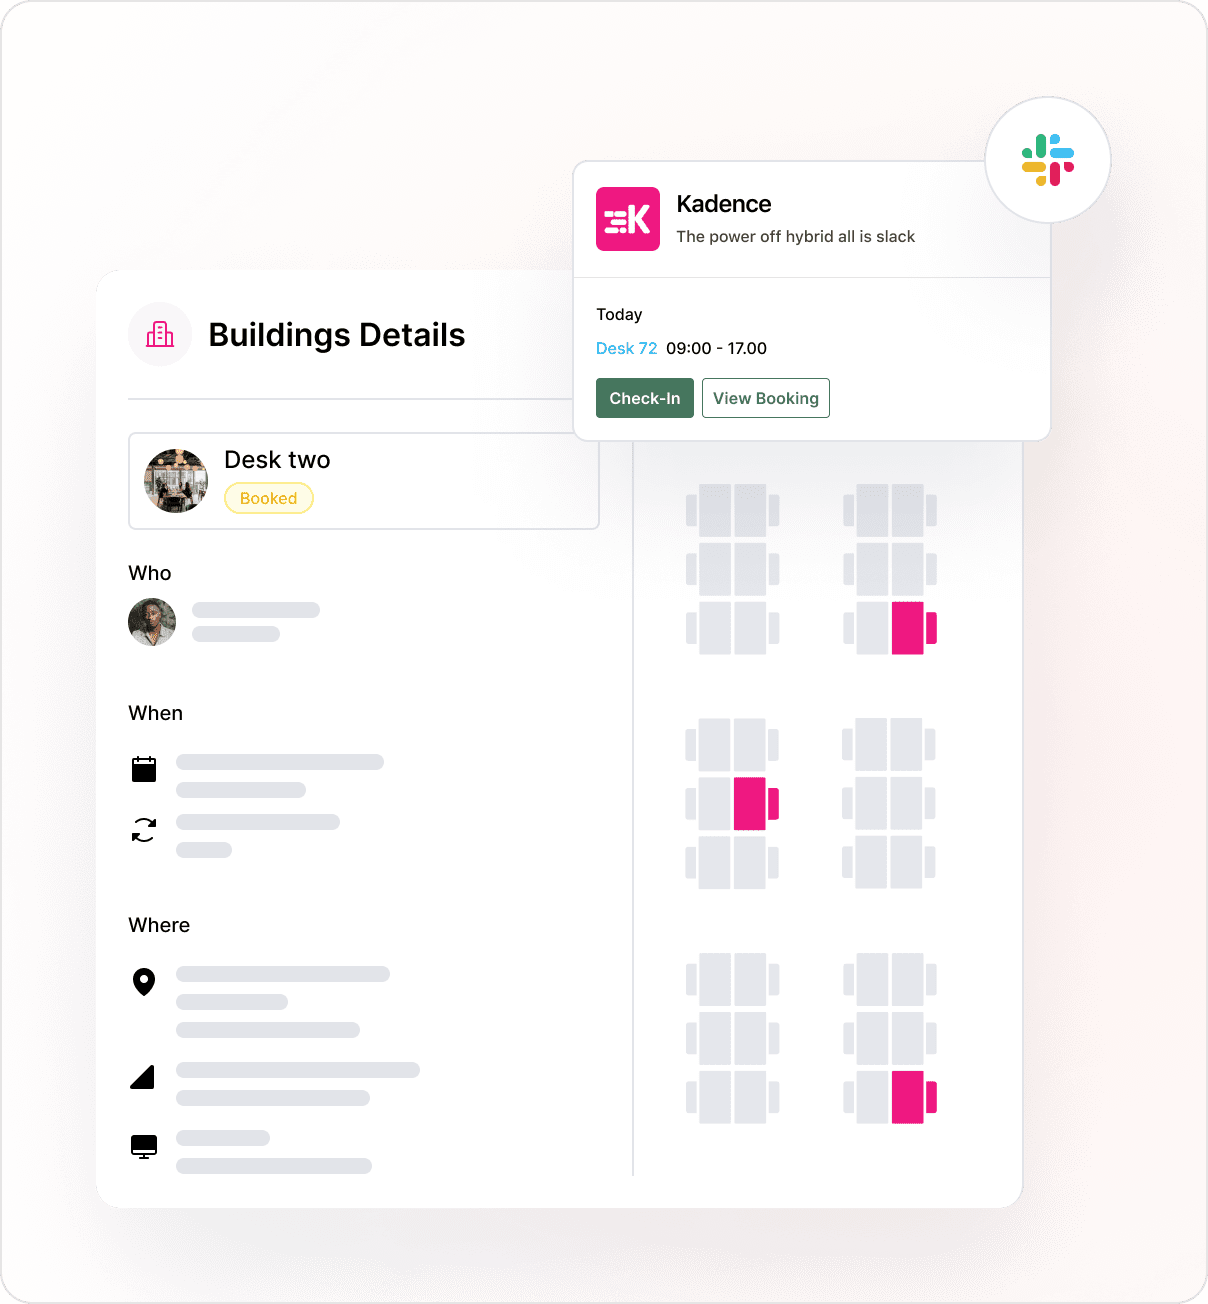 This is an image of a floor plan with its building details along with a check-in notification with a slack logo